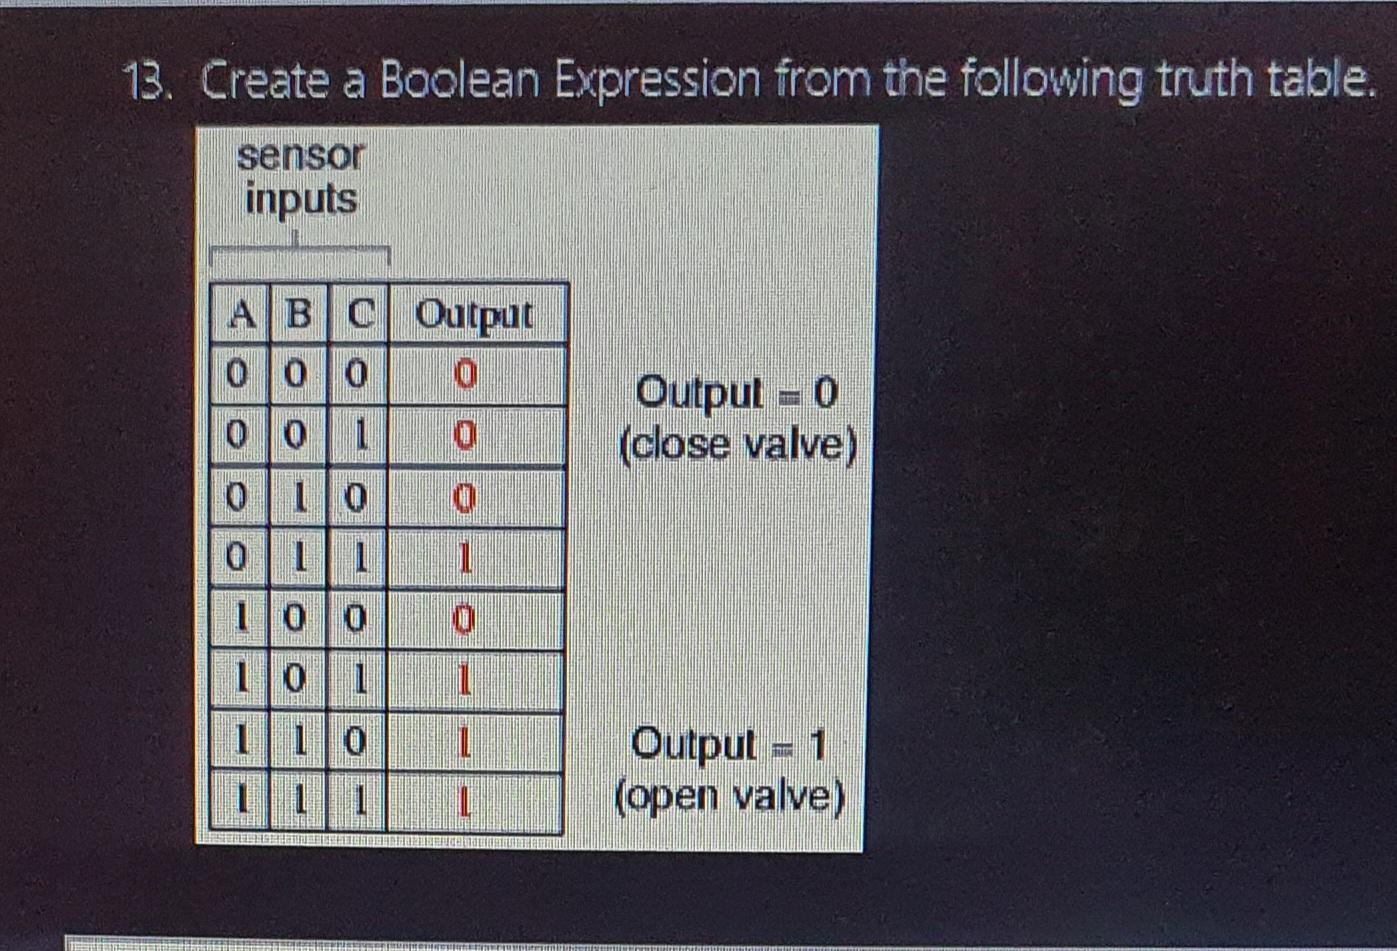 13. Create a Boolean Expression from the following truth table. sensor inputs ABC Output 000 0 001 0 10 0 1 0